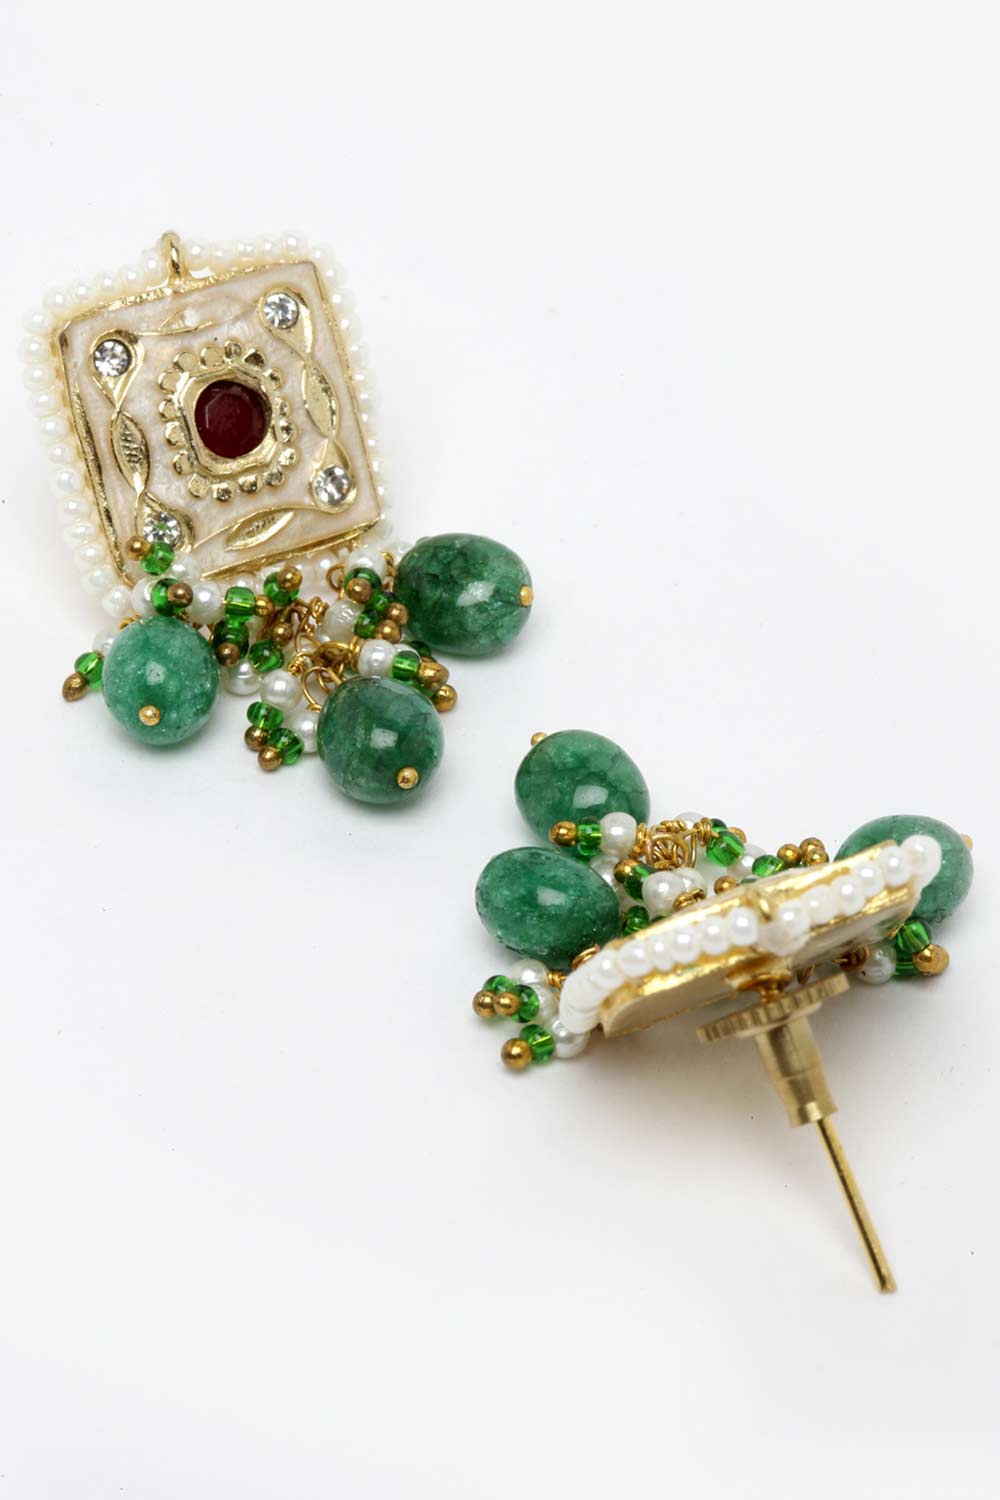 Green And Peach Gold-Plated American Diamonds And Pearls Chandbali Earrings